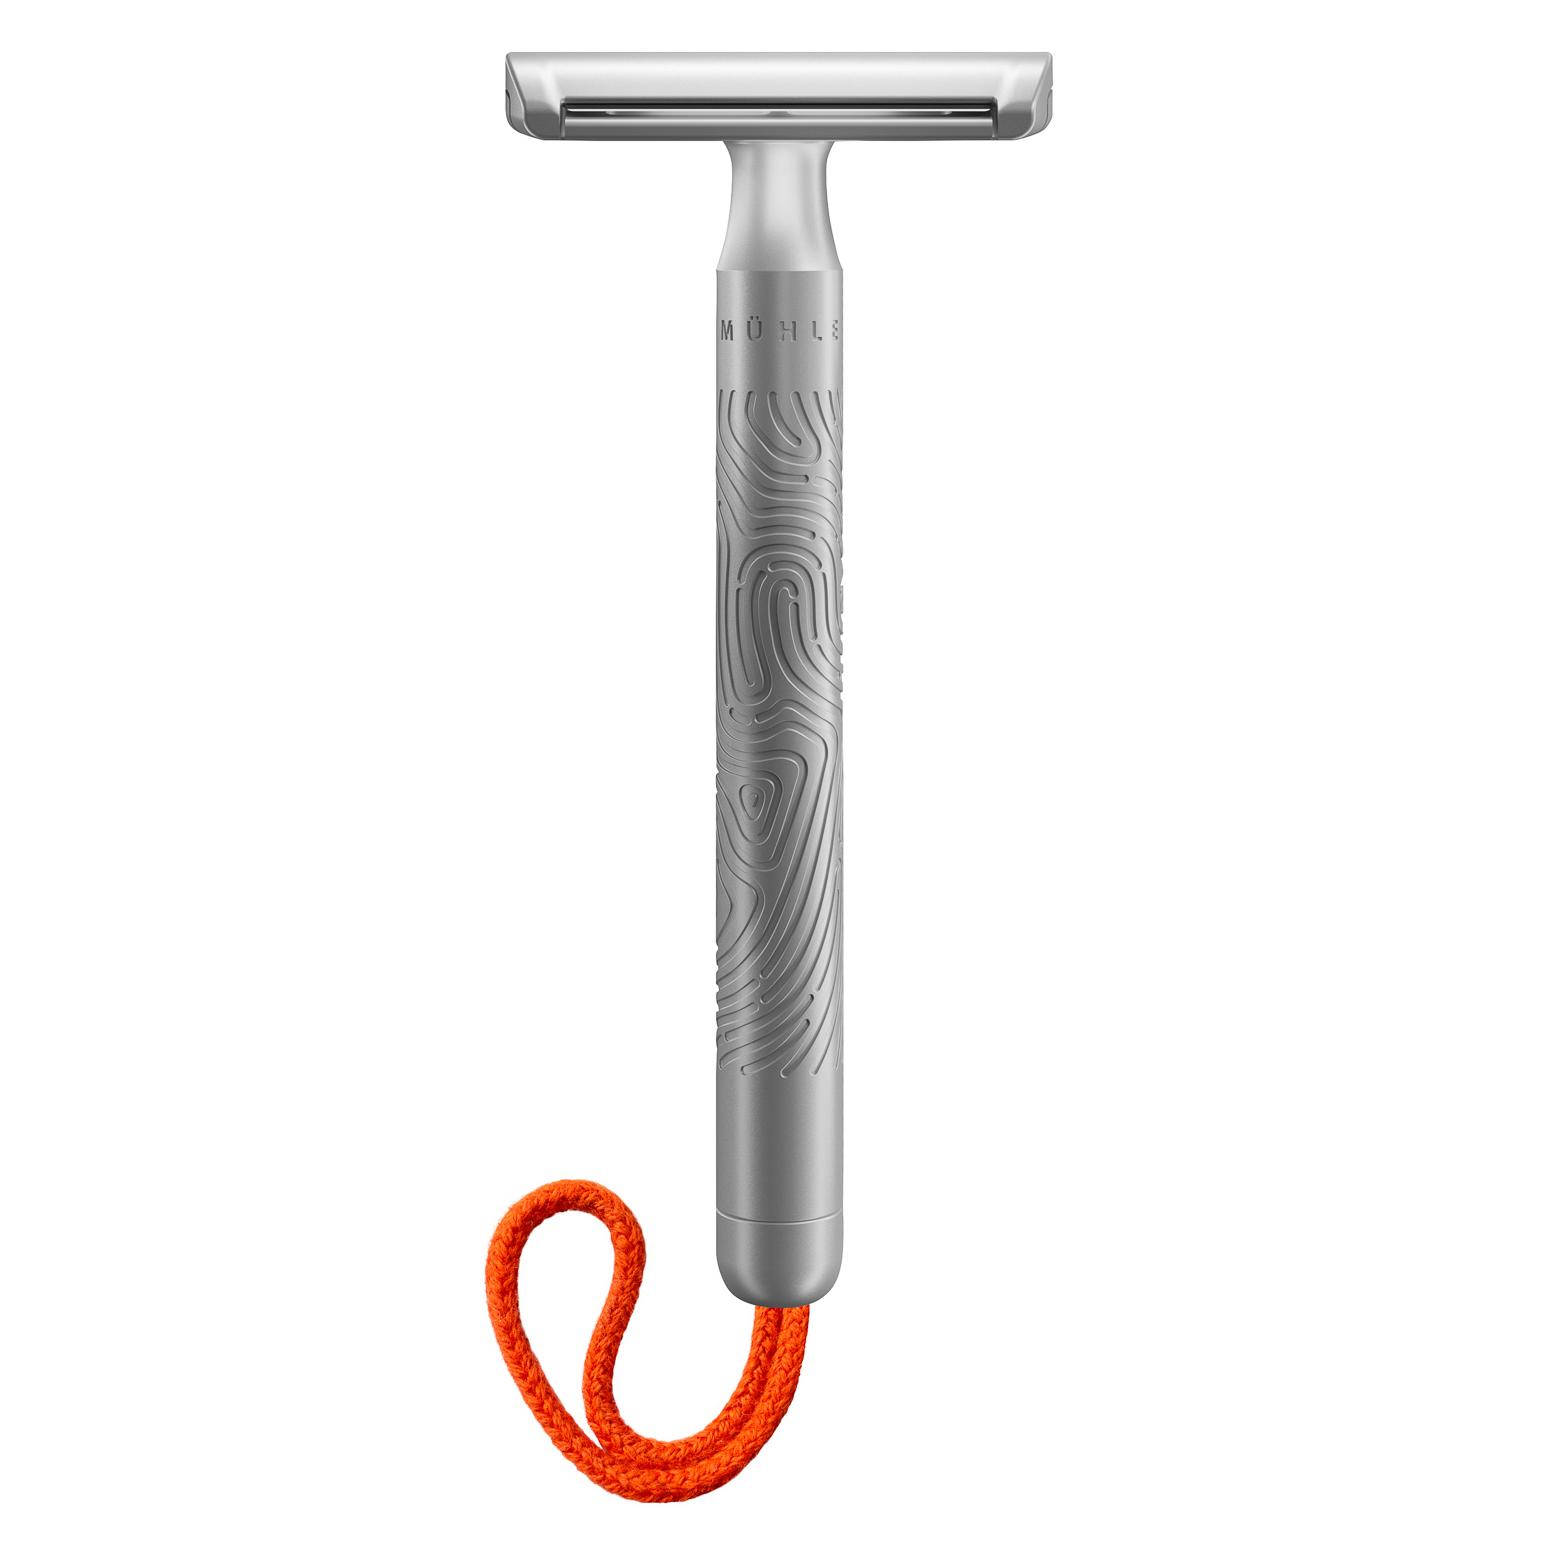 MUHLE Companion safety razor with coral colour cord